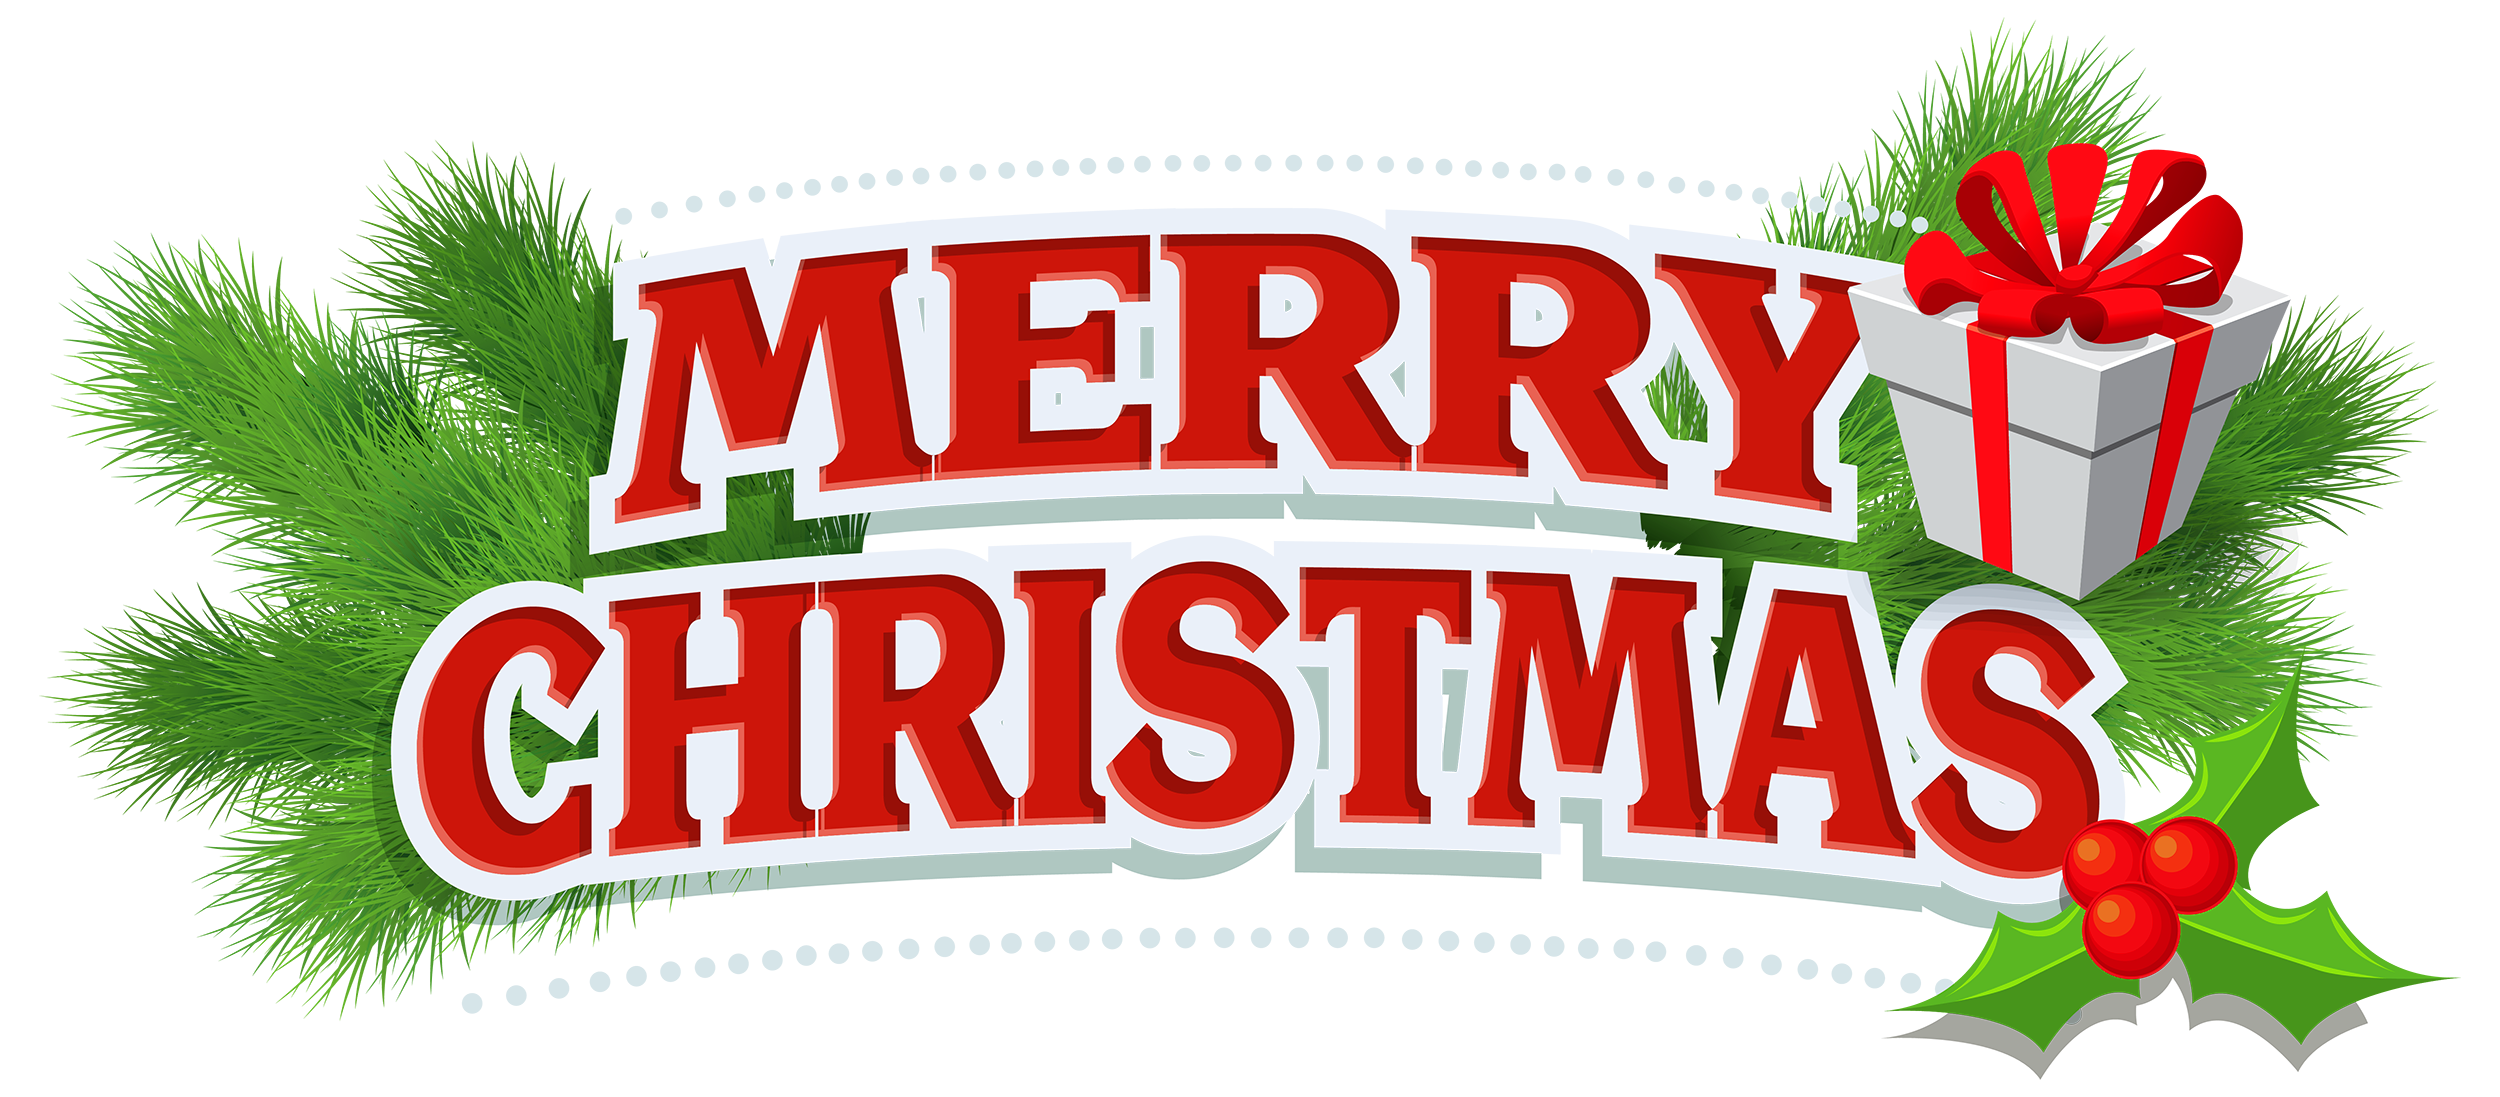 Facebook clipart web. Merry christmas decor with